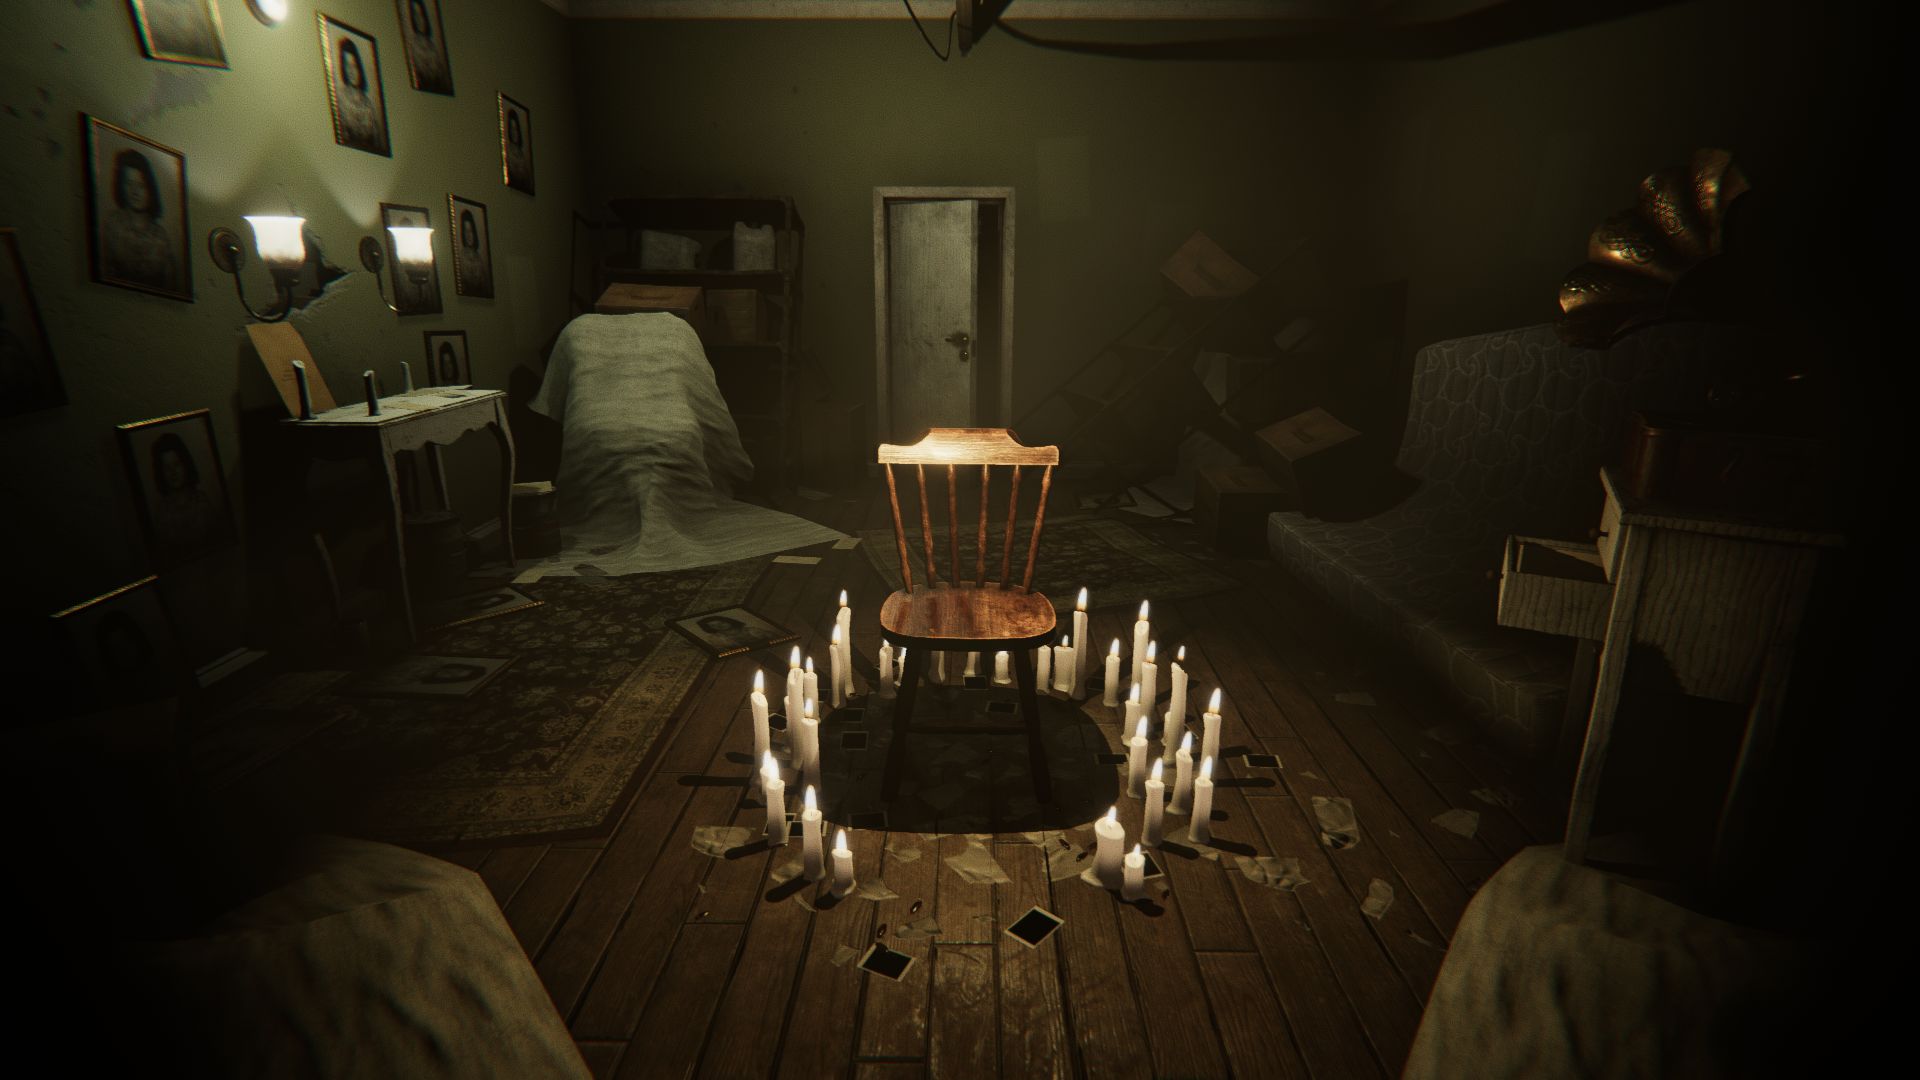 A screenshot of a scary chair surrounded by candles and Polaroid images in Madison